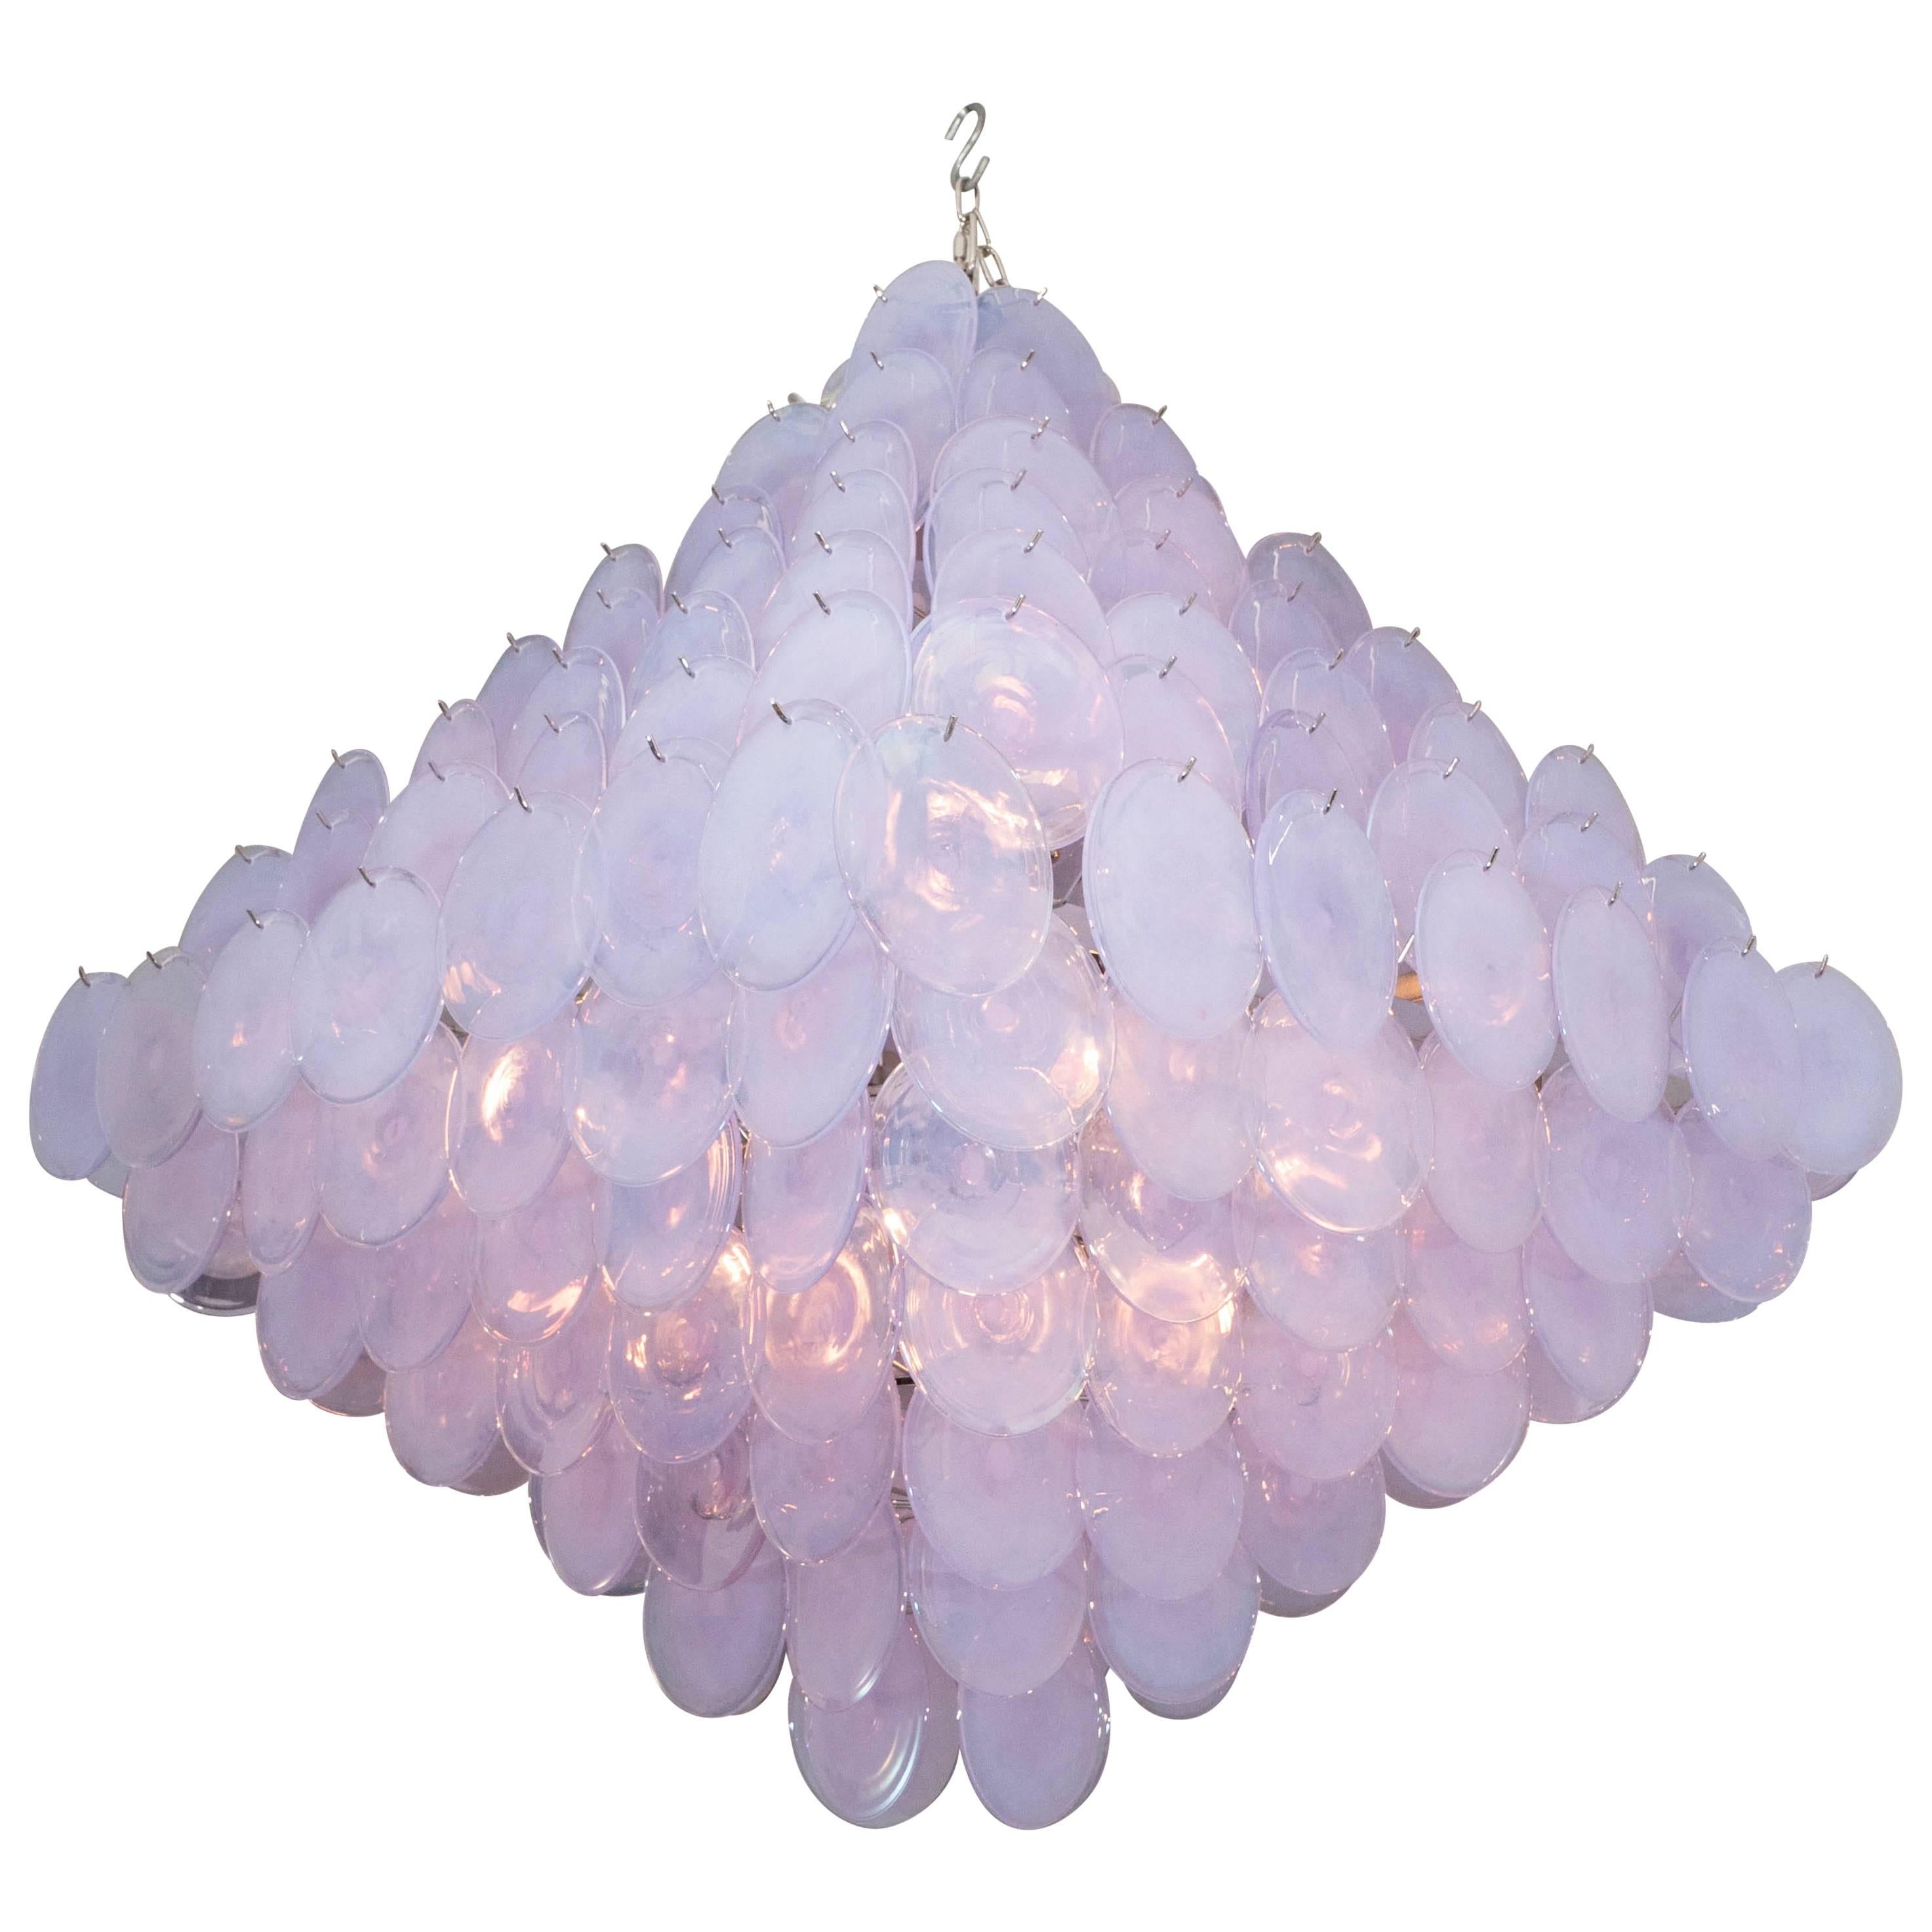 Huge Alex Iridescent Murano Glass Disc Chandelier in Double Pyramid Shape For Sale